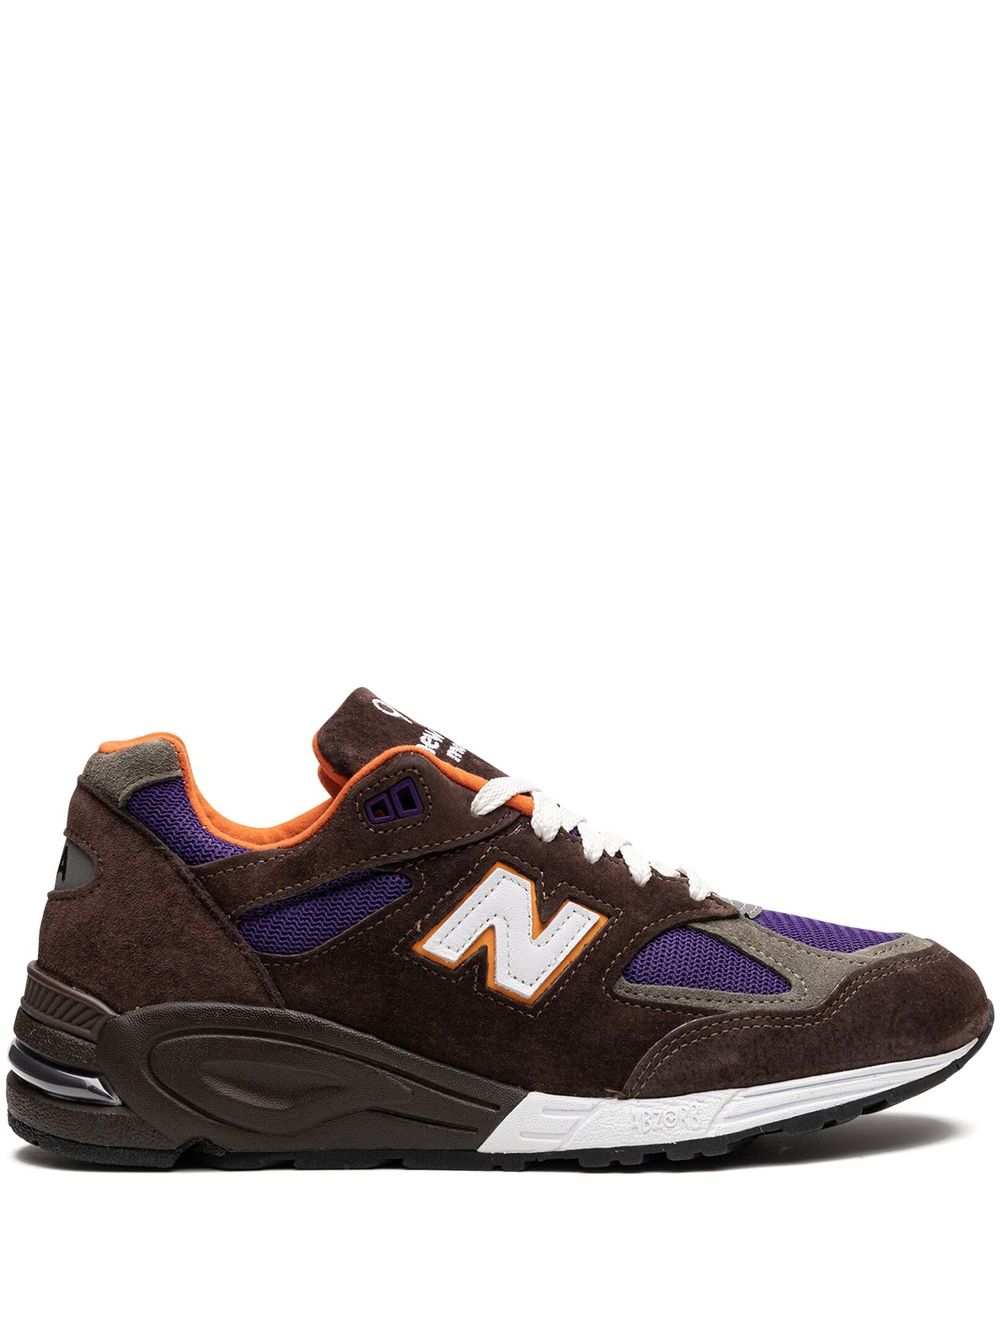 New Balance 990v2 "MADE in USA" sneakers - Brown